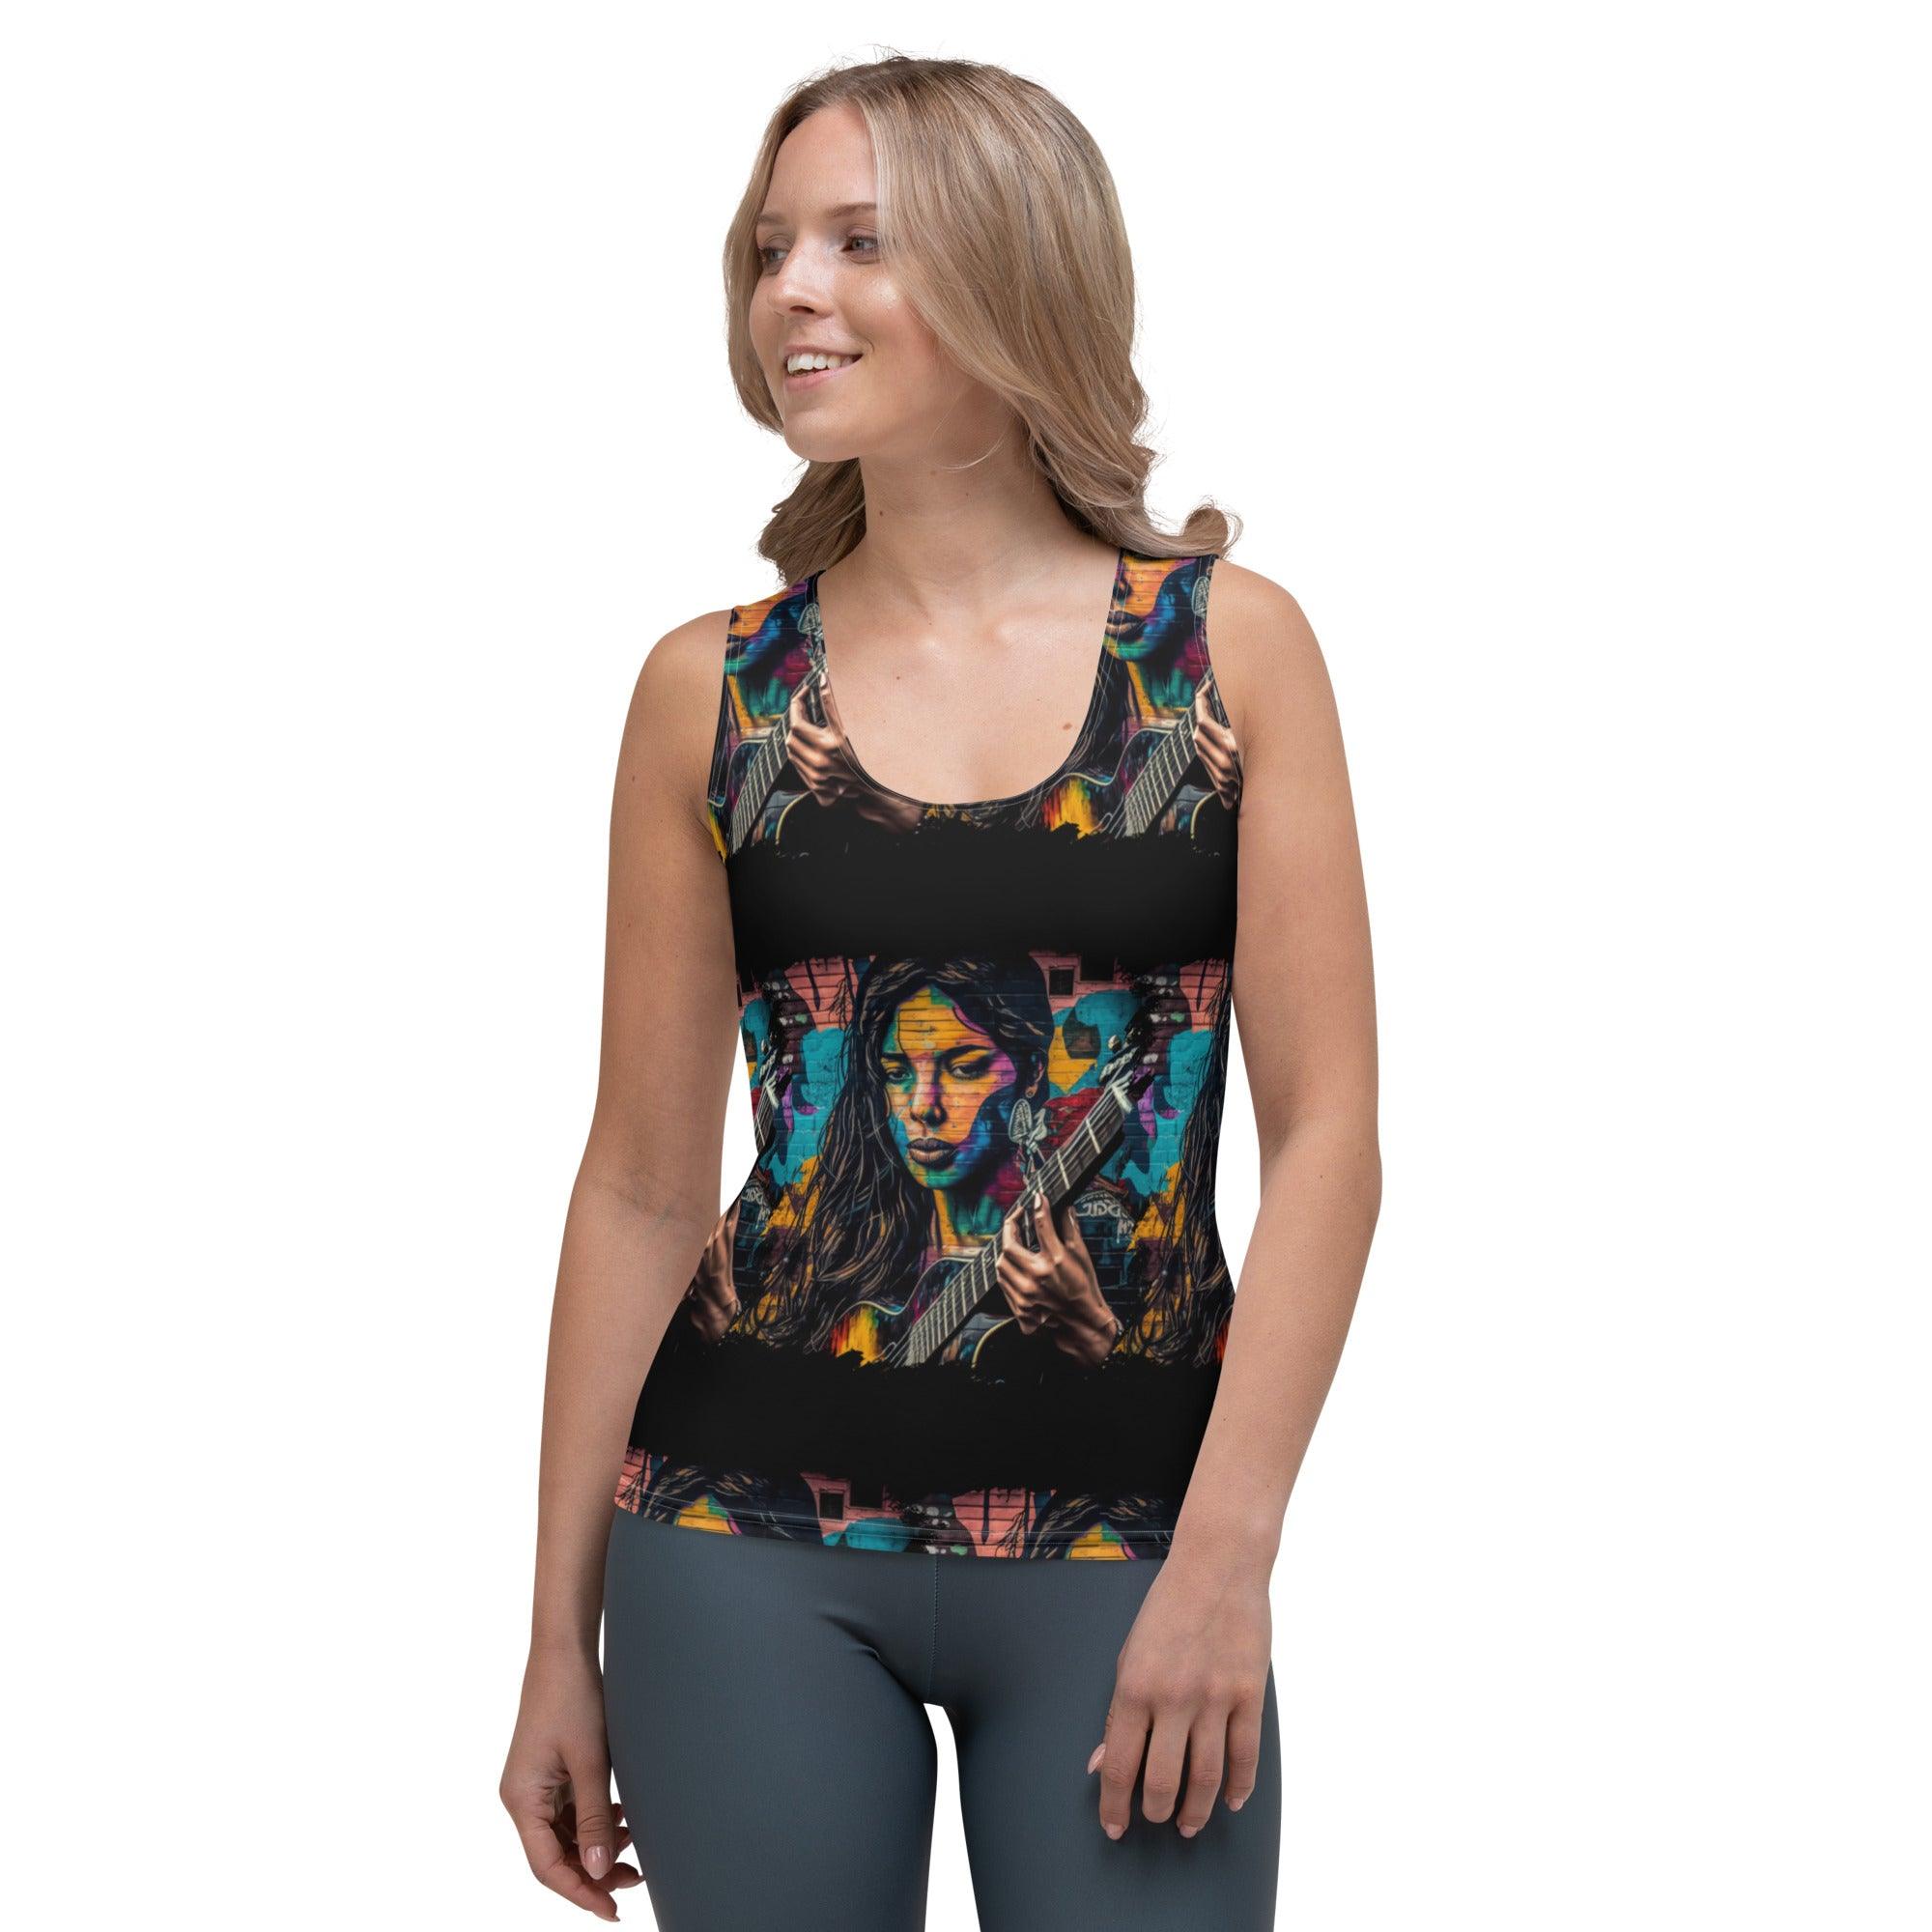 Guitar Is Her Voice Sublimation Cut & Sew Tank Top - Beyond T-shirts